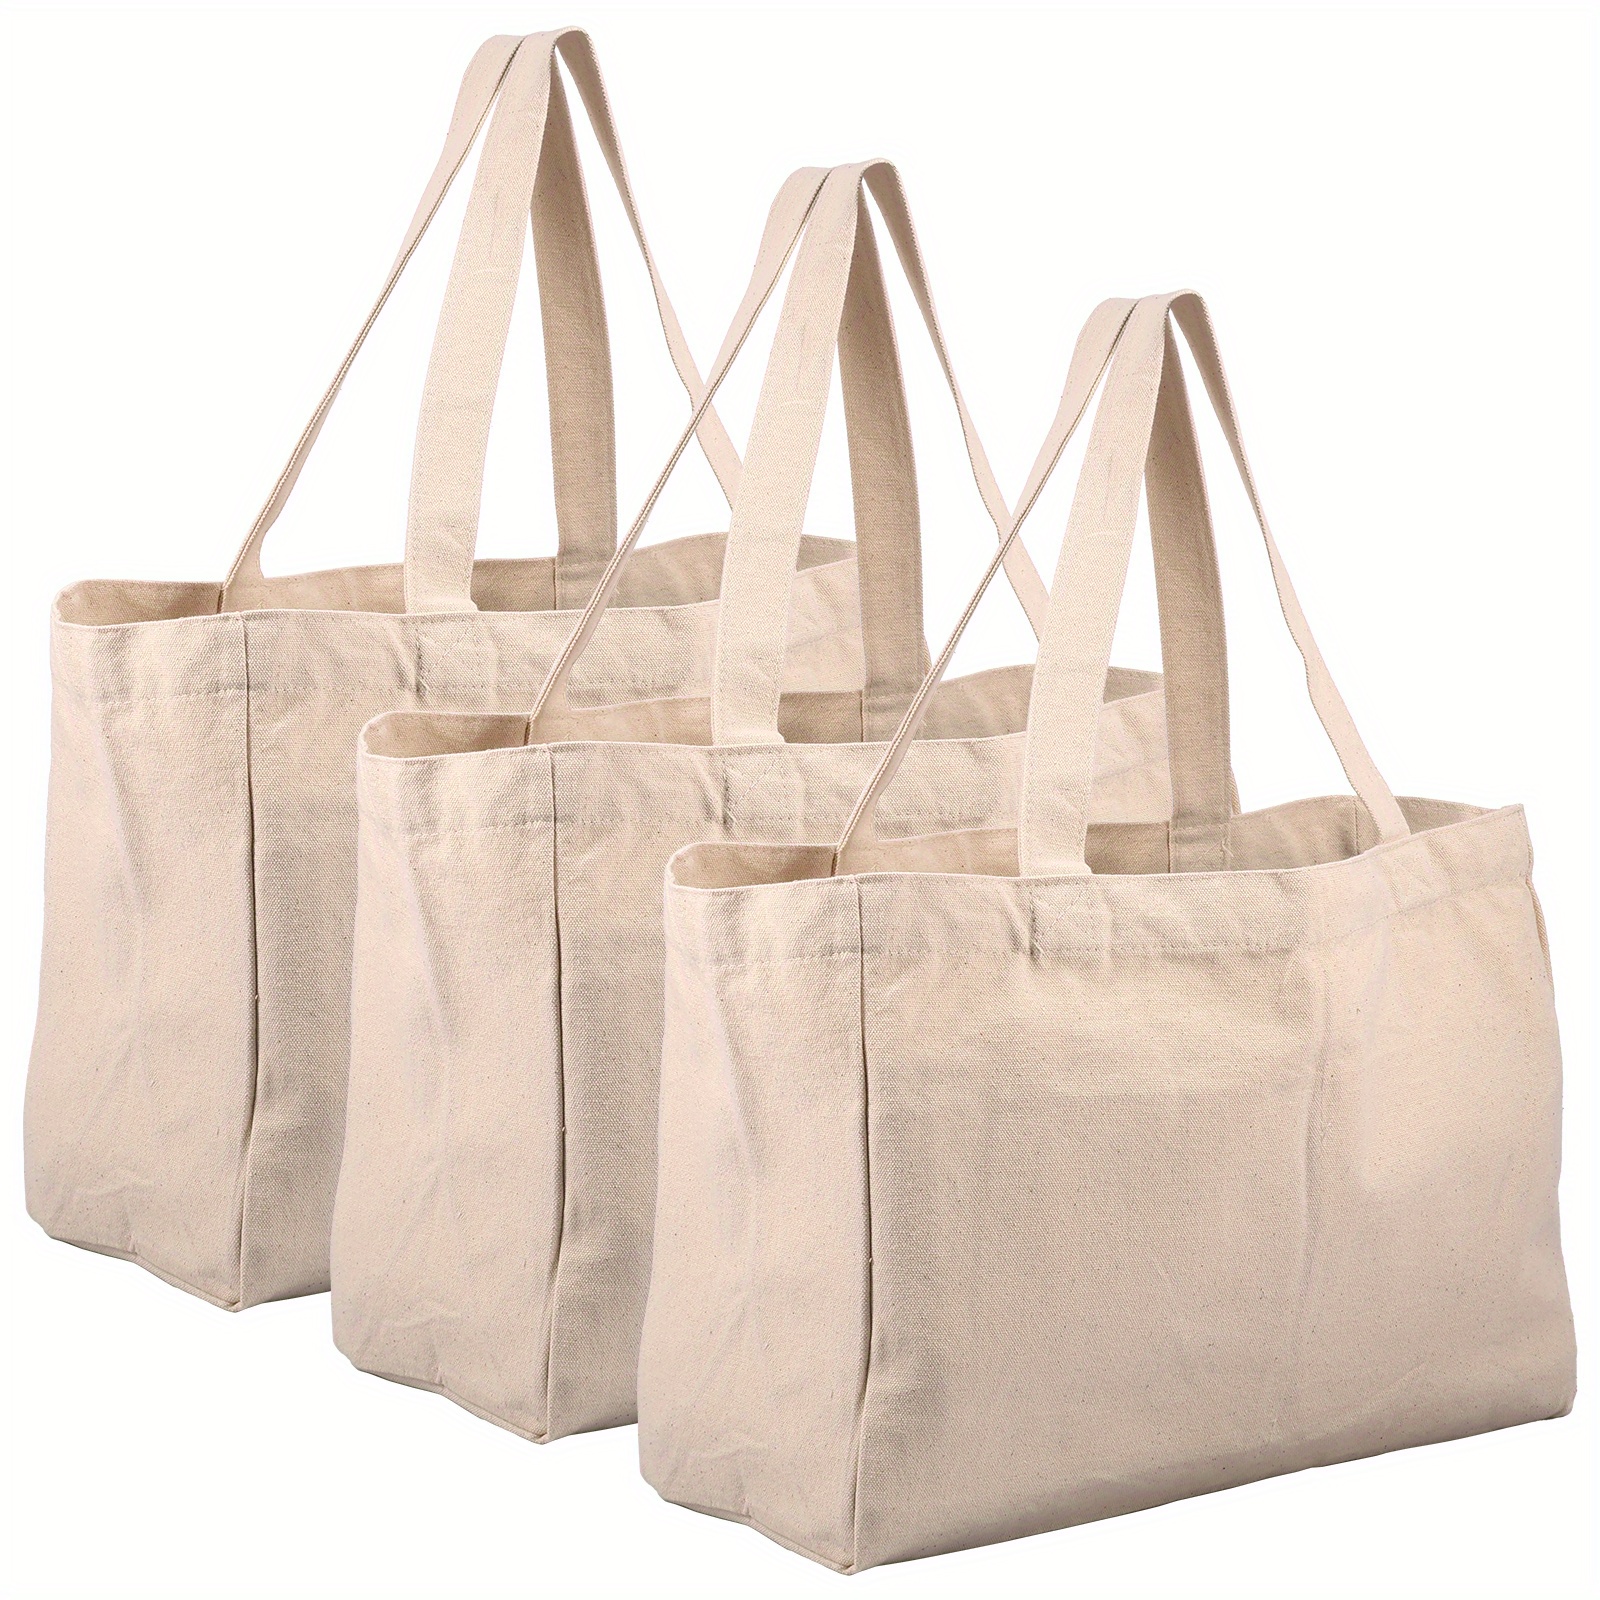 24 Pieces Canvas Tote Bags, Blank Plain Canvas Bag Lightweight